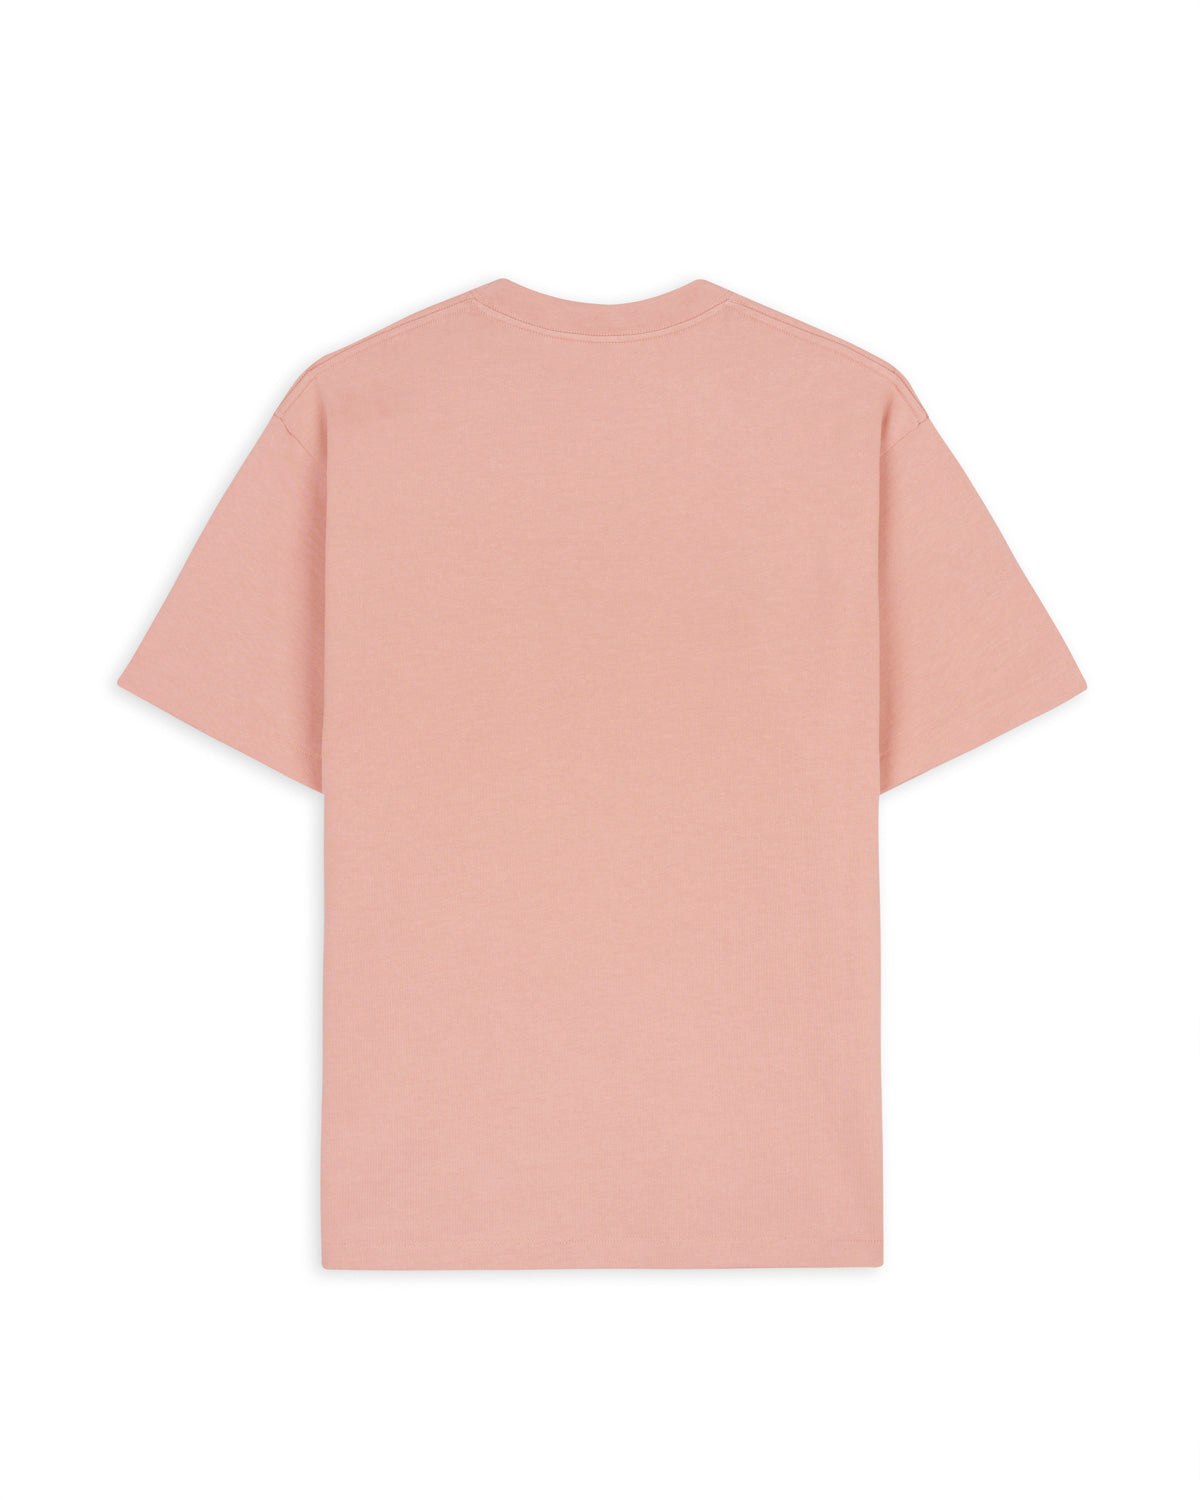 3D Embroidered Logohead Heavy Weight T-Shirt - Peach 2